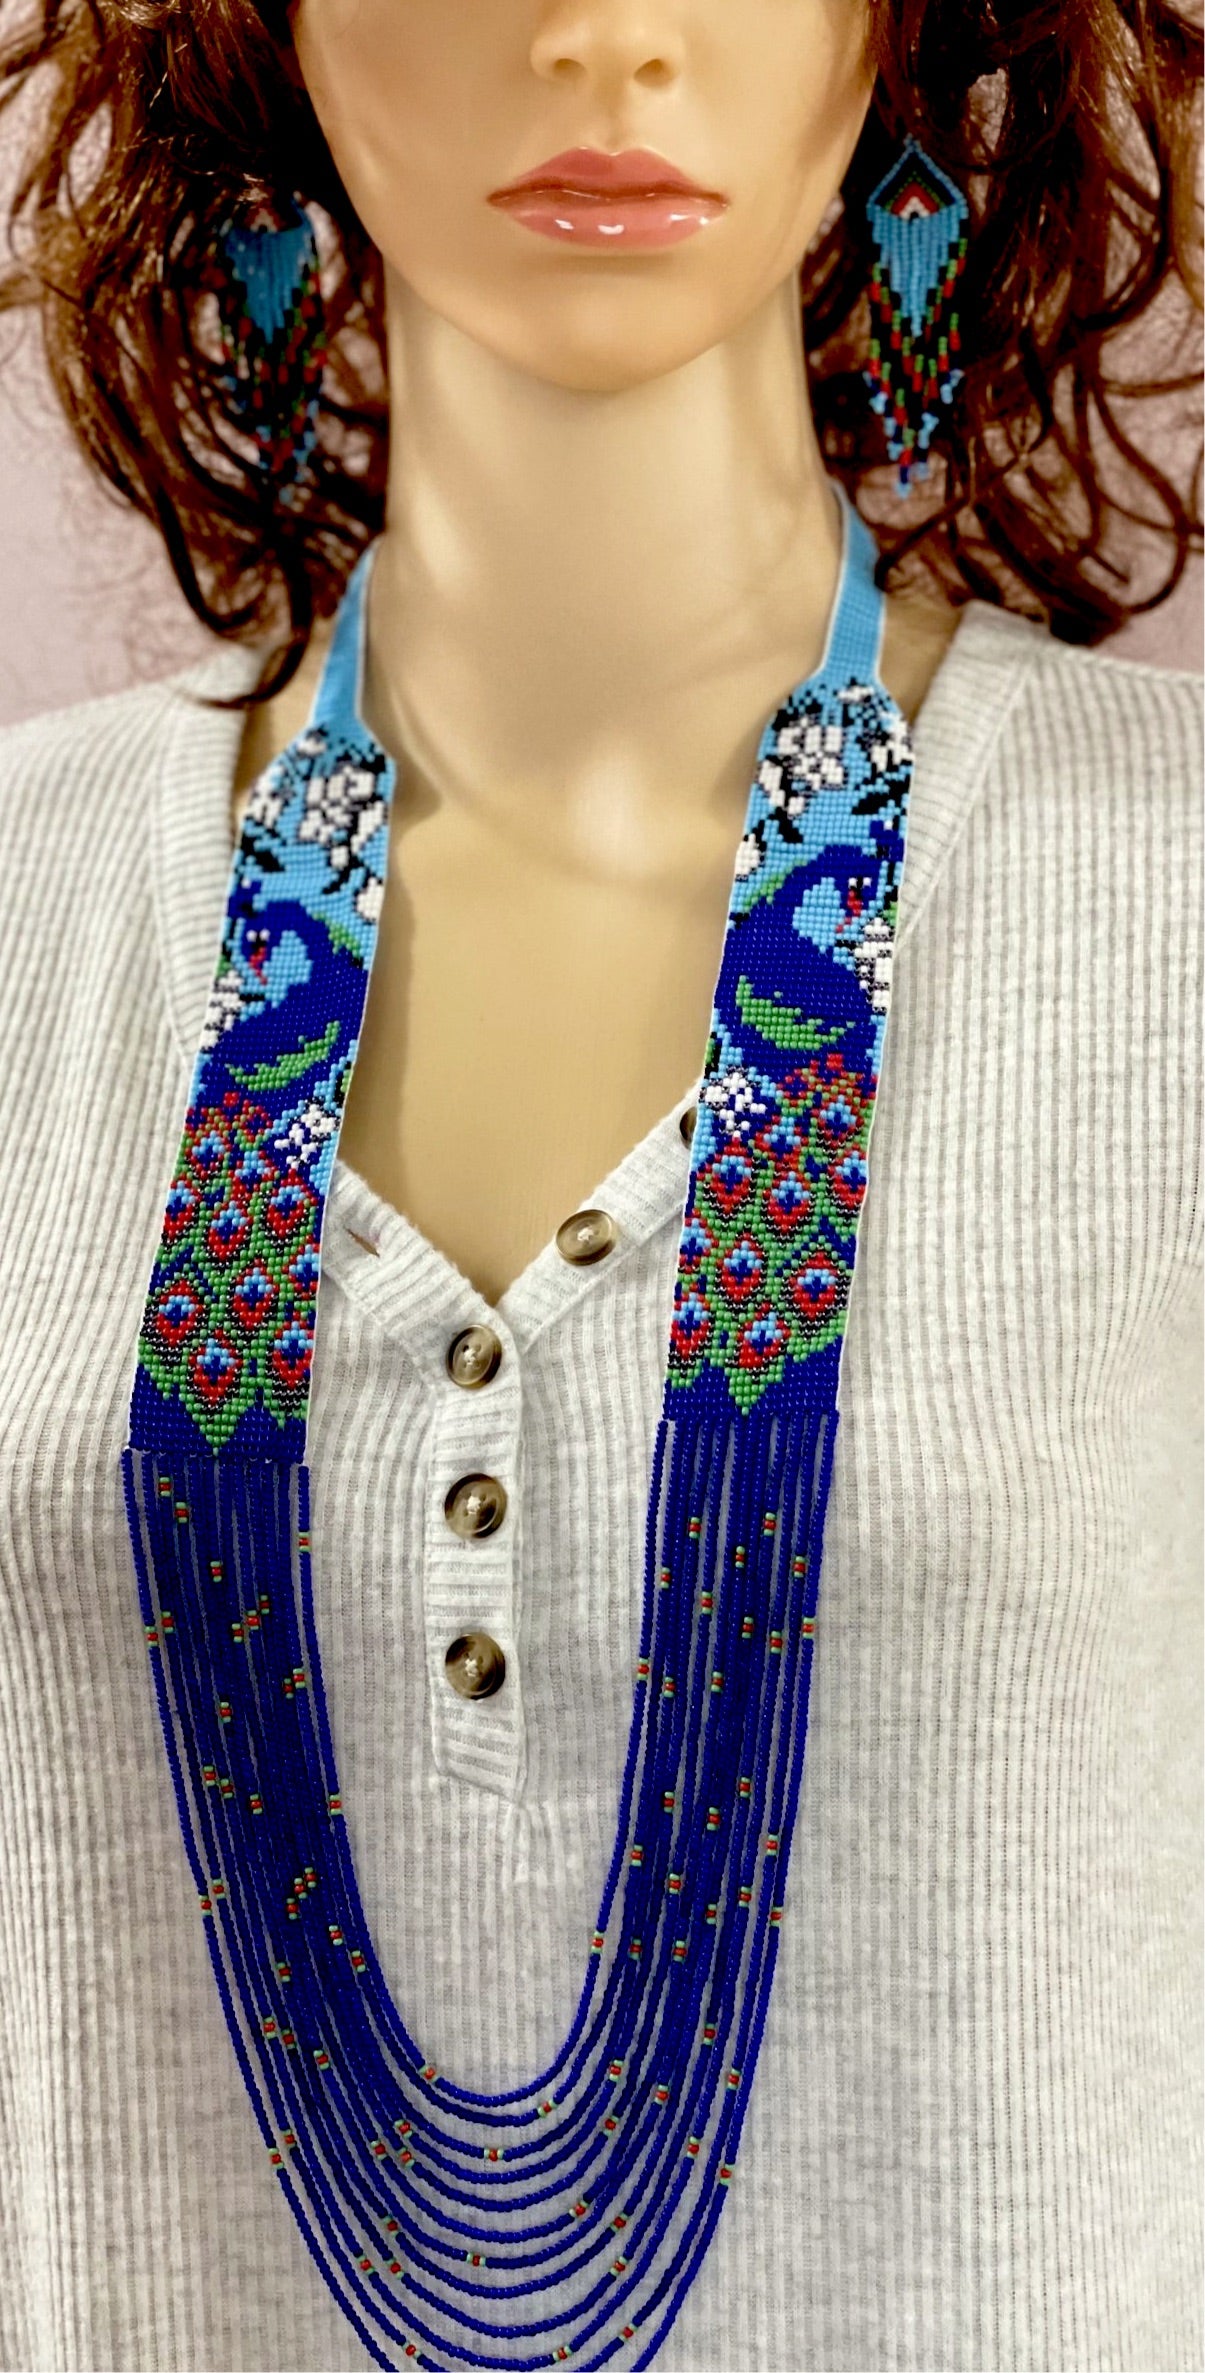 Handcrafted seed bead necklace earrings peacock jewelry design for Women